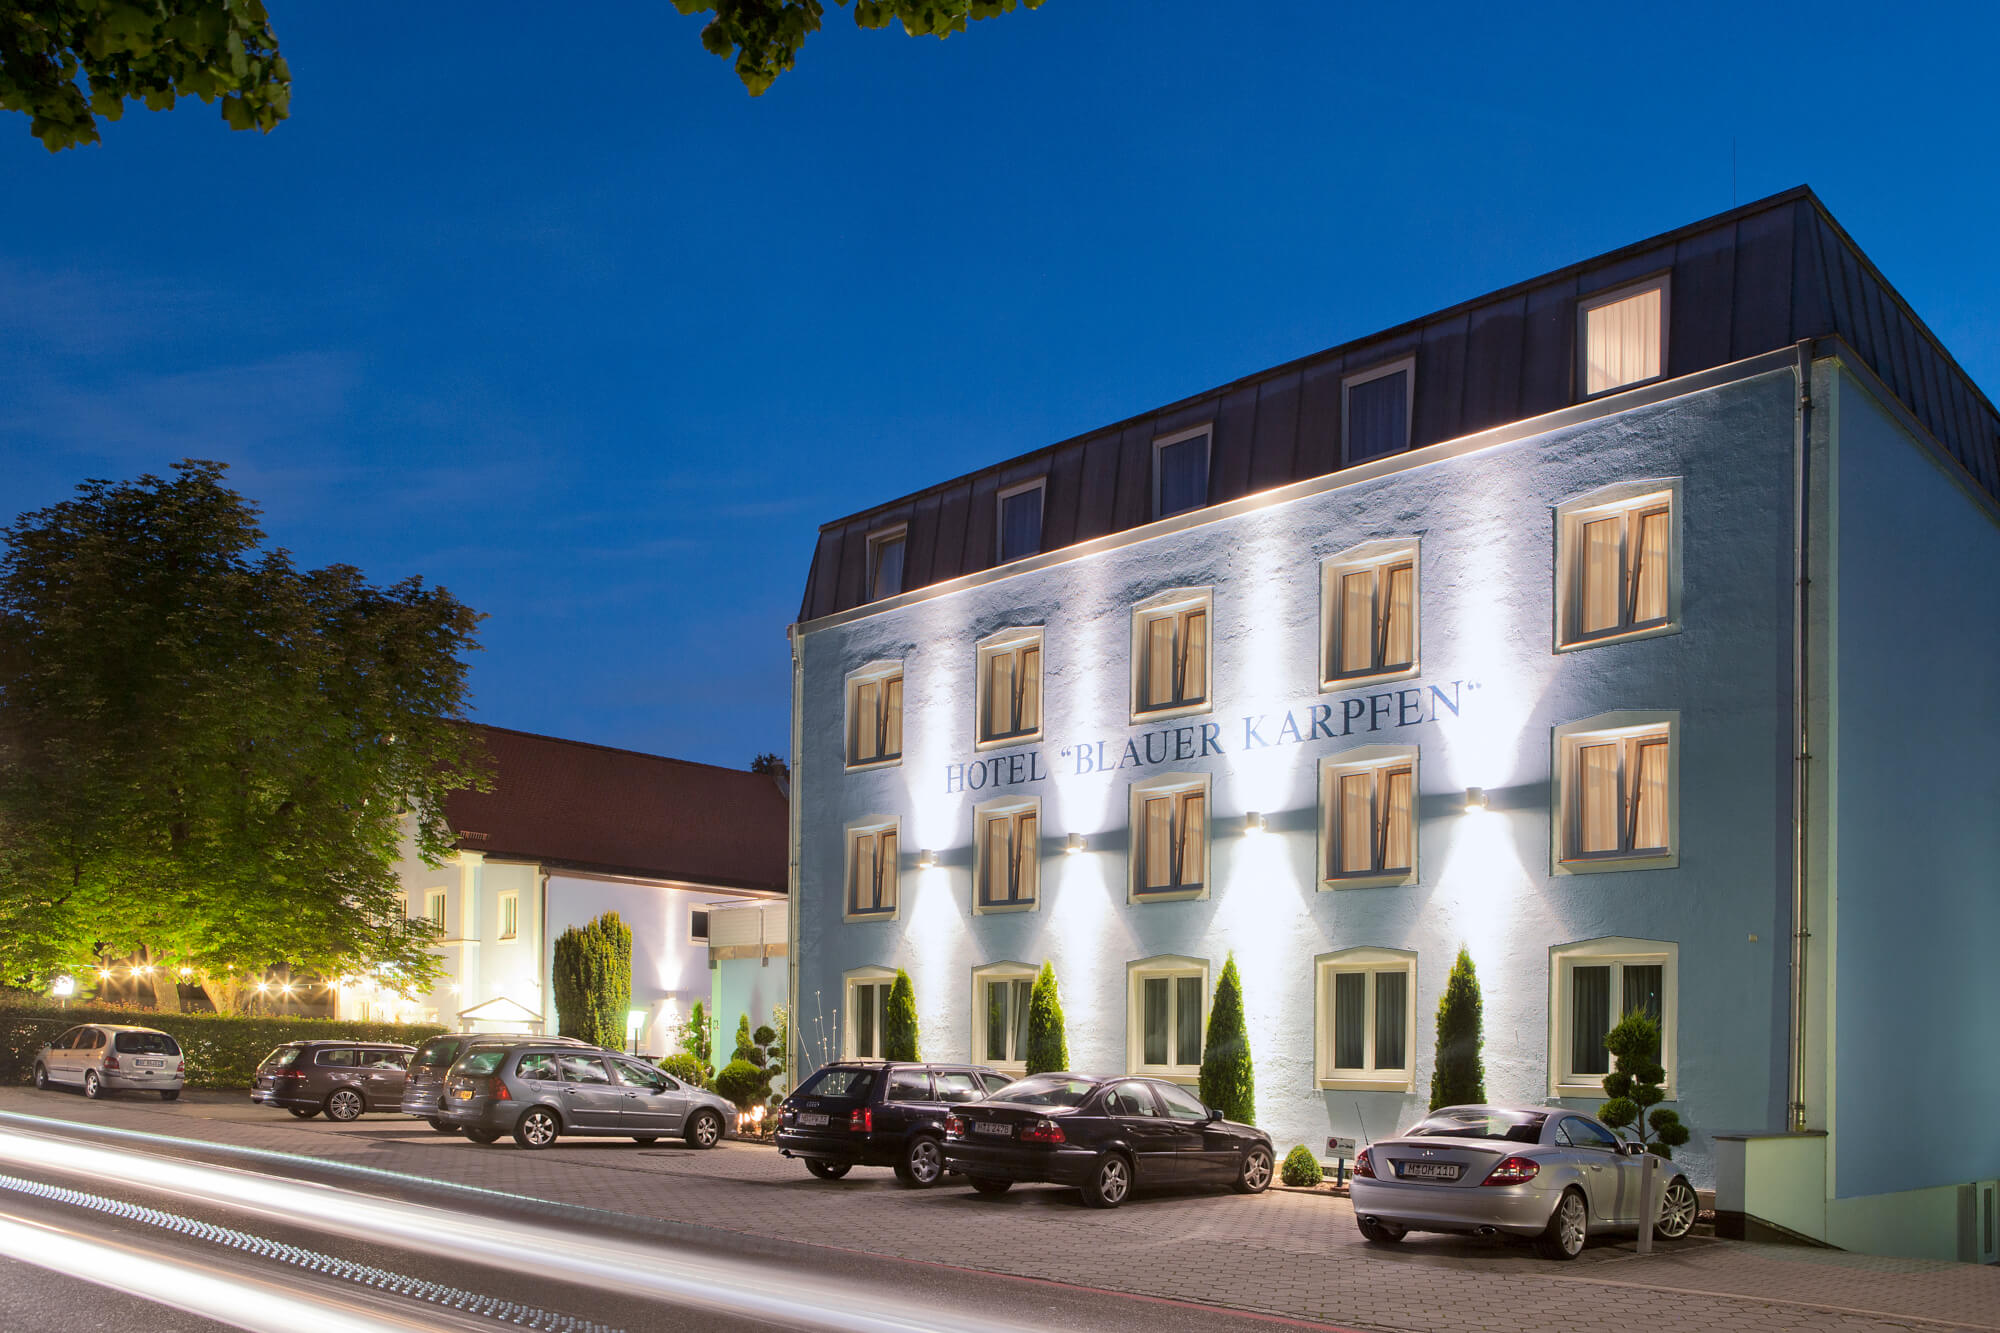 Spend the night in style in the vicinity of Munich